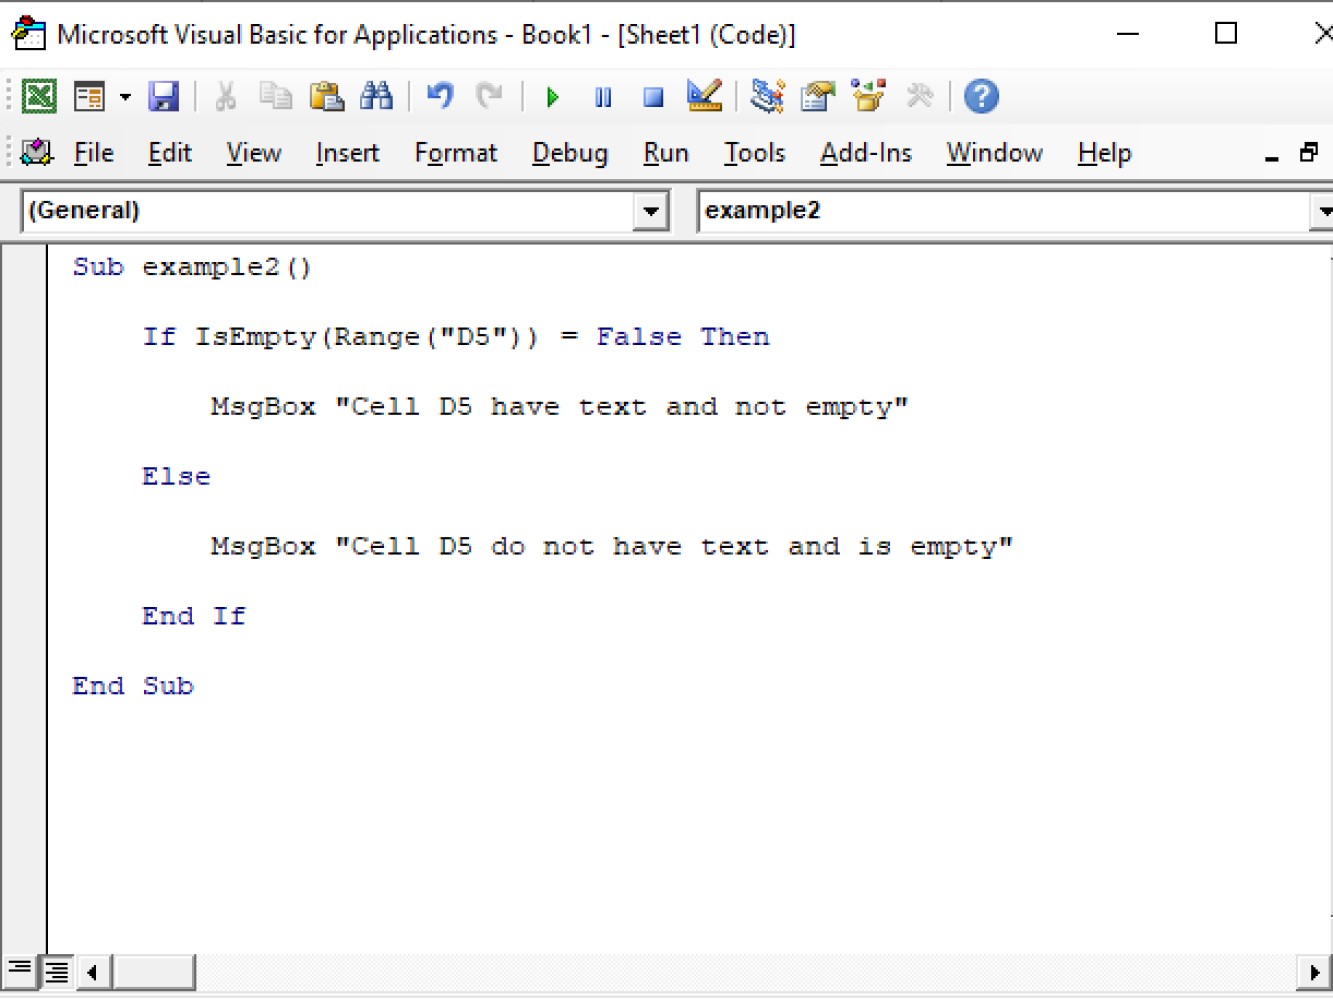 Screenshot of the code for customizing texts in the message box in IsEmpty function